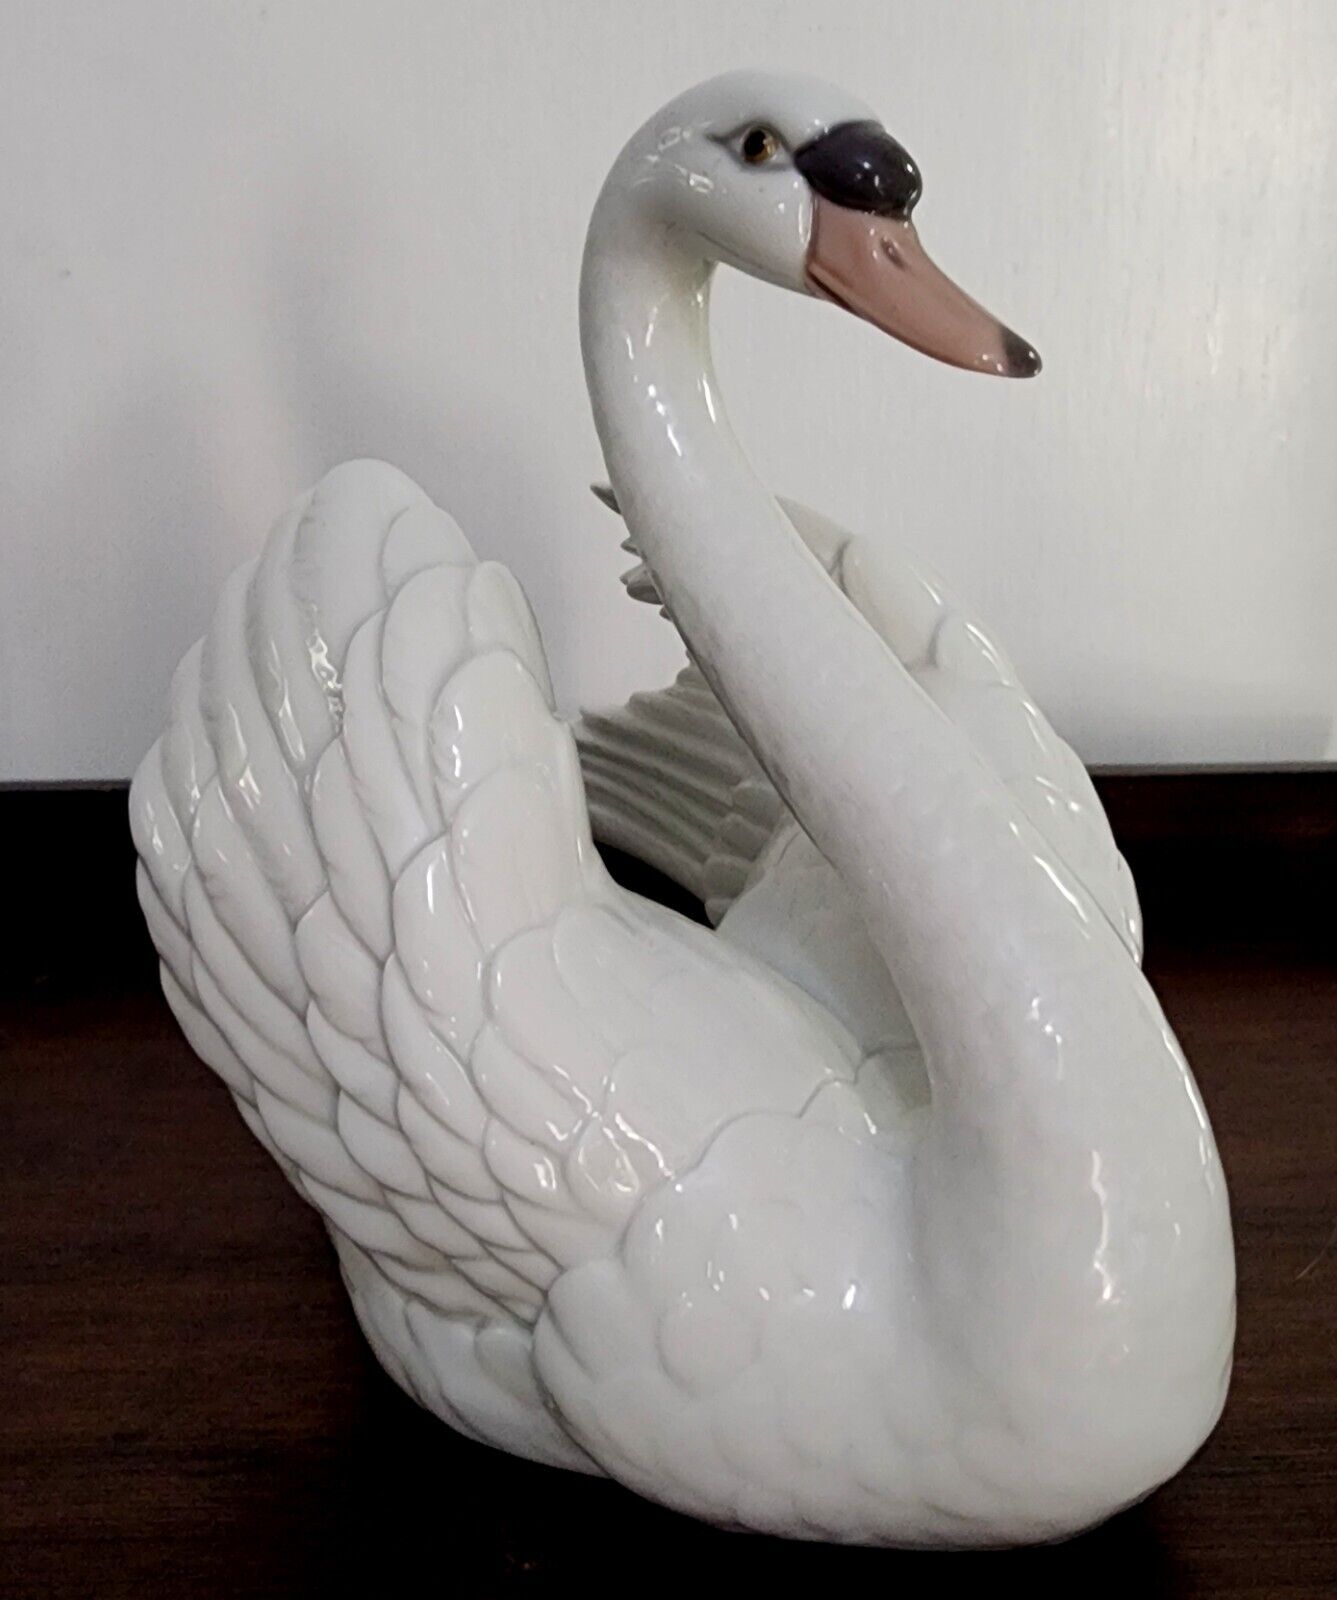 Vtg 1983 Lladro Spain Figurine ~ Porcelain Swan with Wings Spread ~ #5231 No box